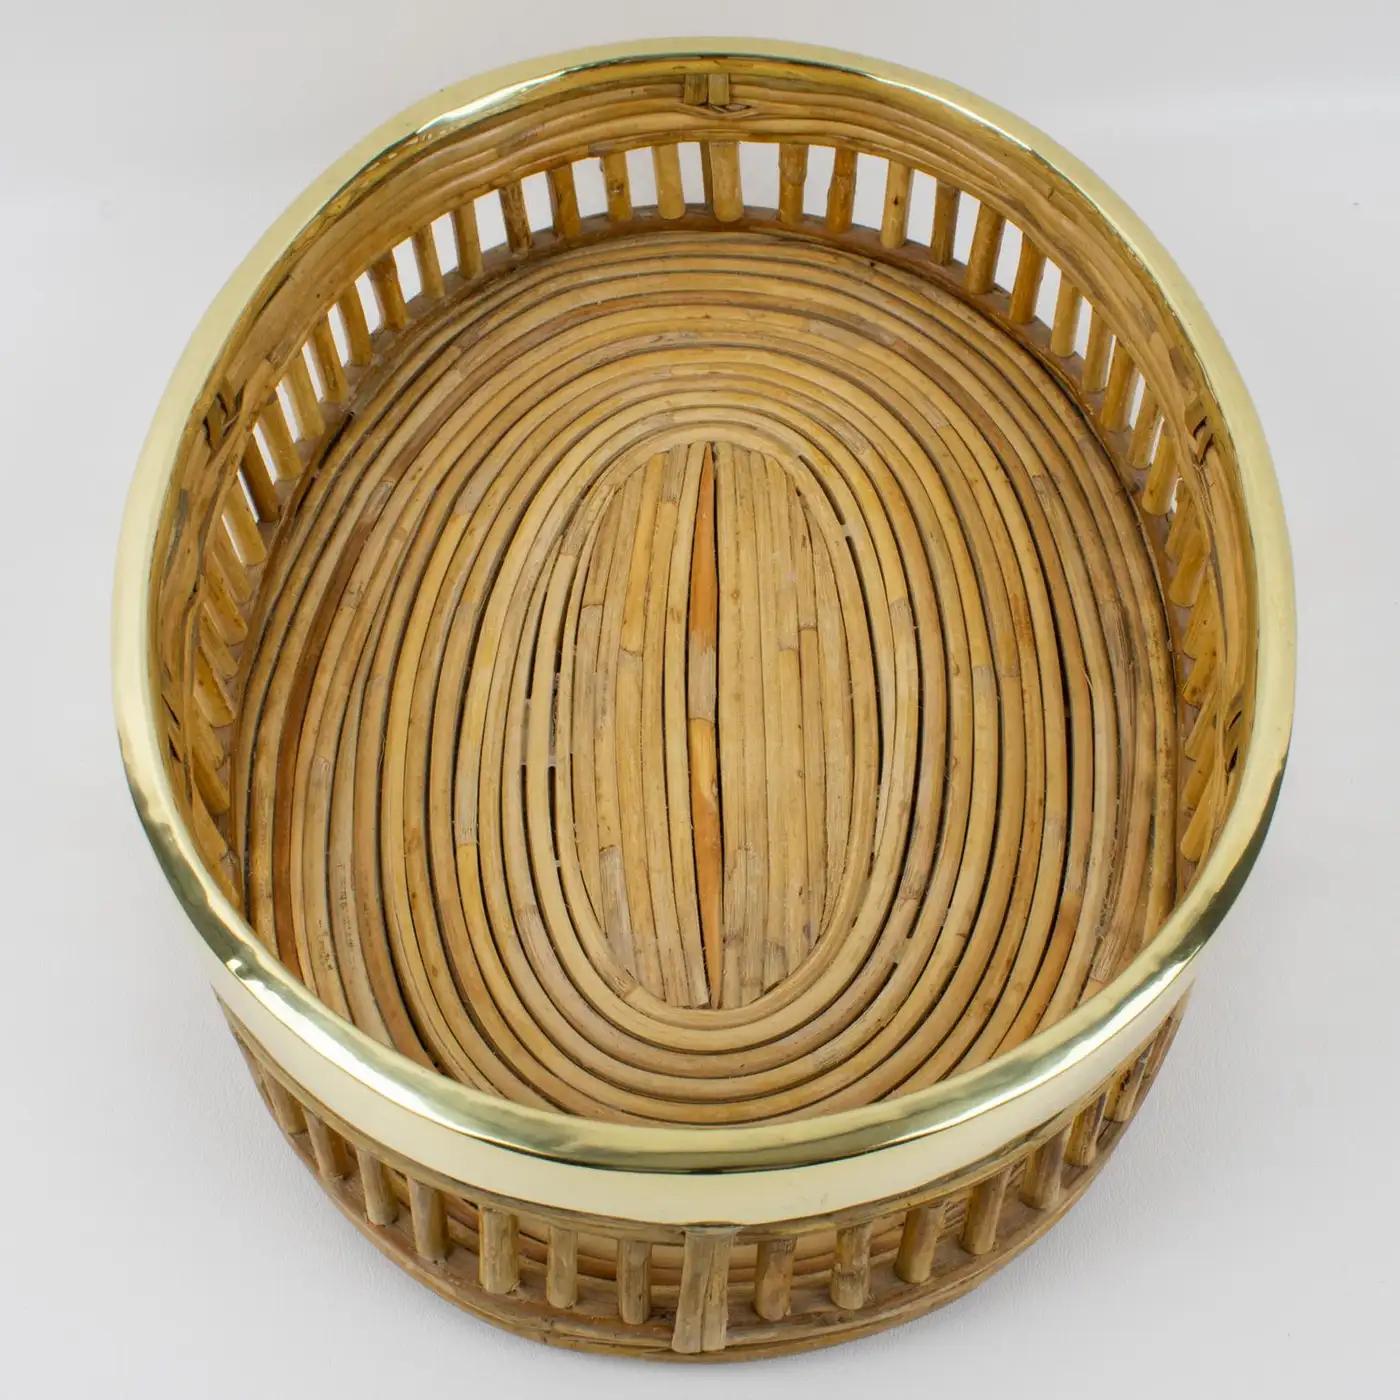 Mid-20th Century Rattan Bamboo Wicker and Brass Bowl Basket Centerpiece, Italy 1960s For Sale